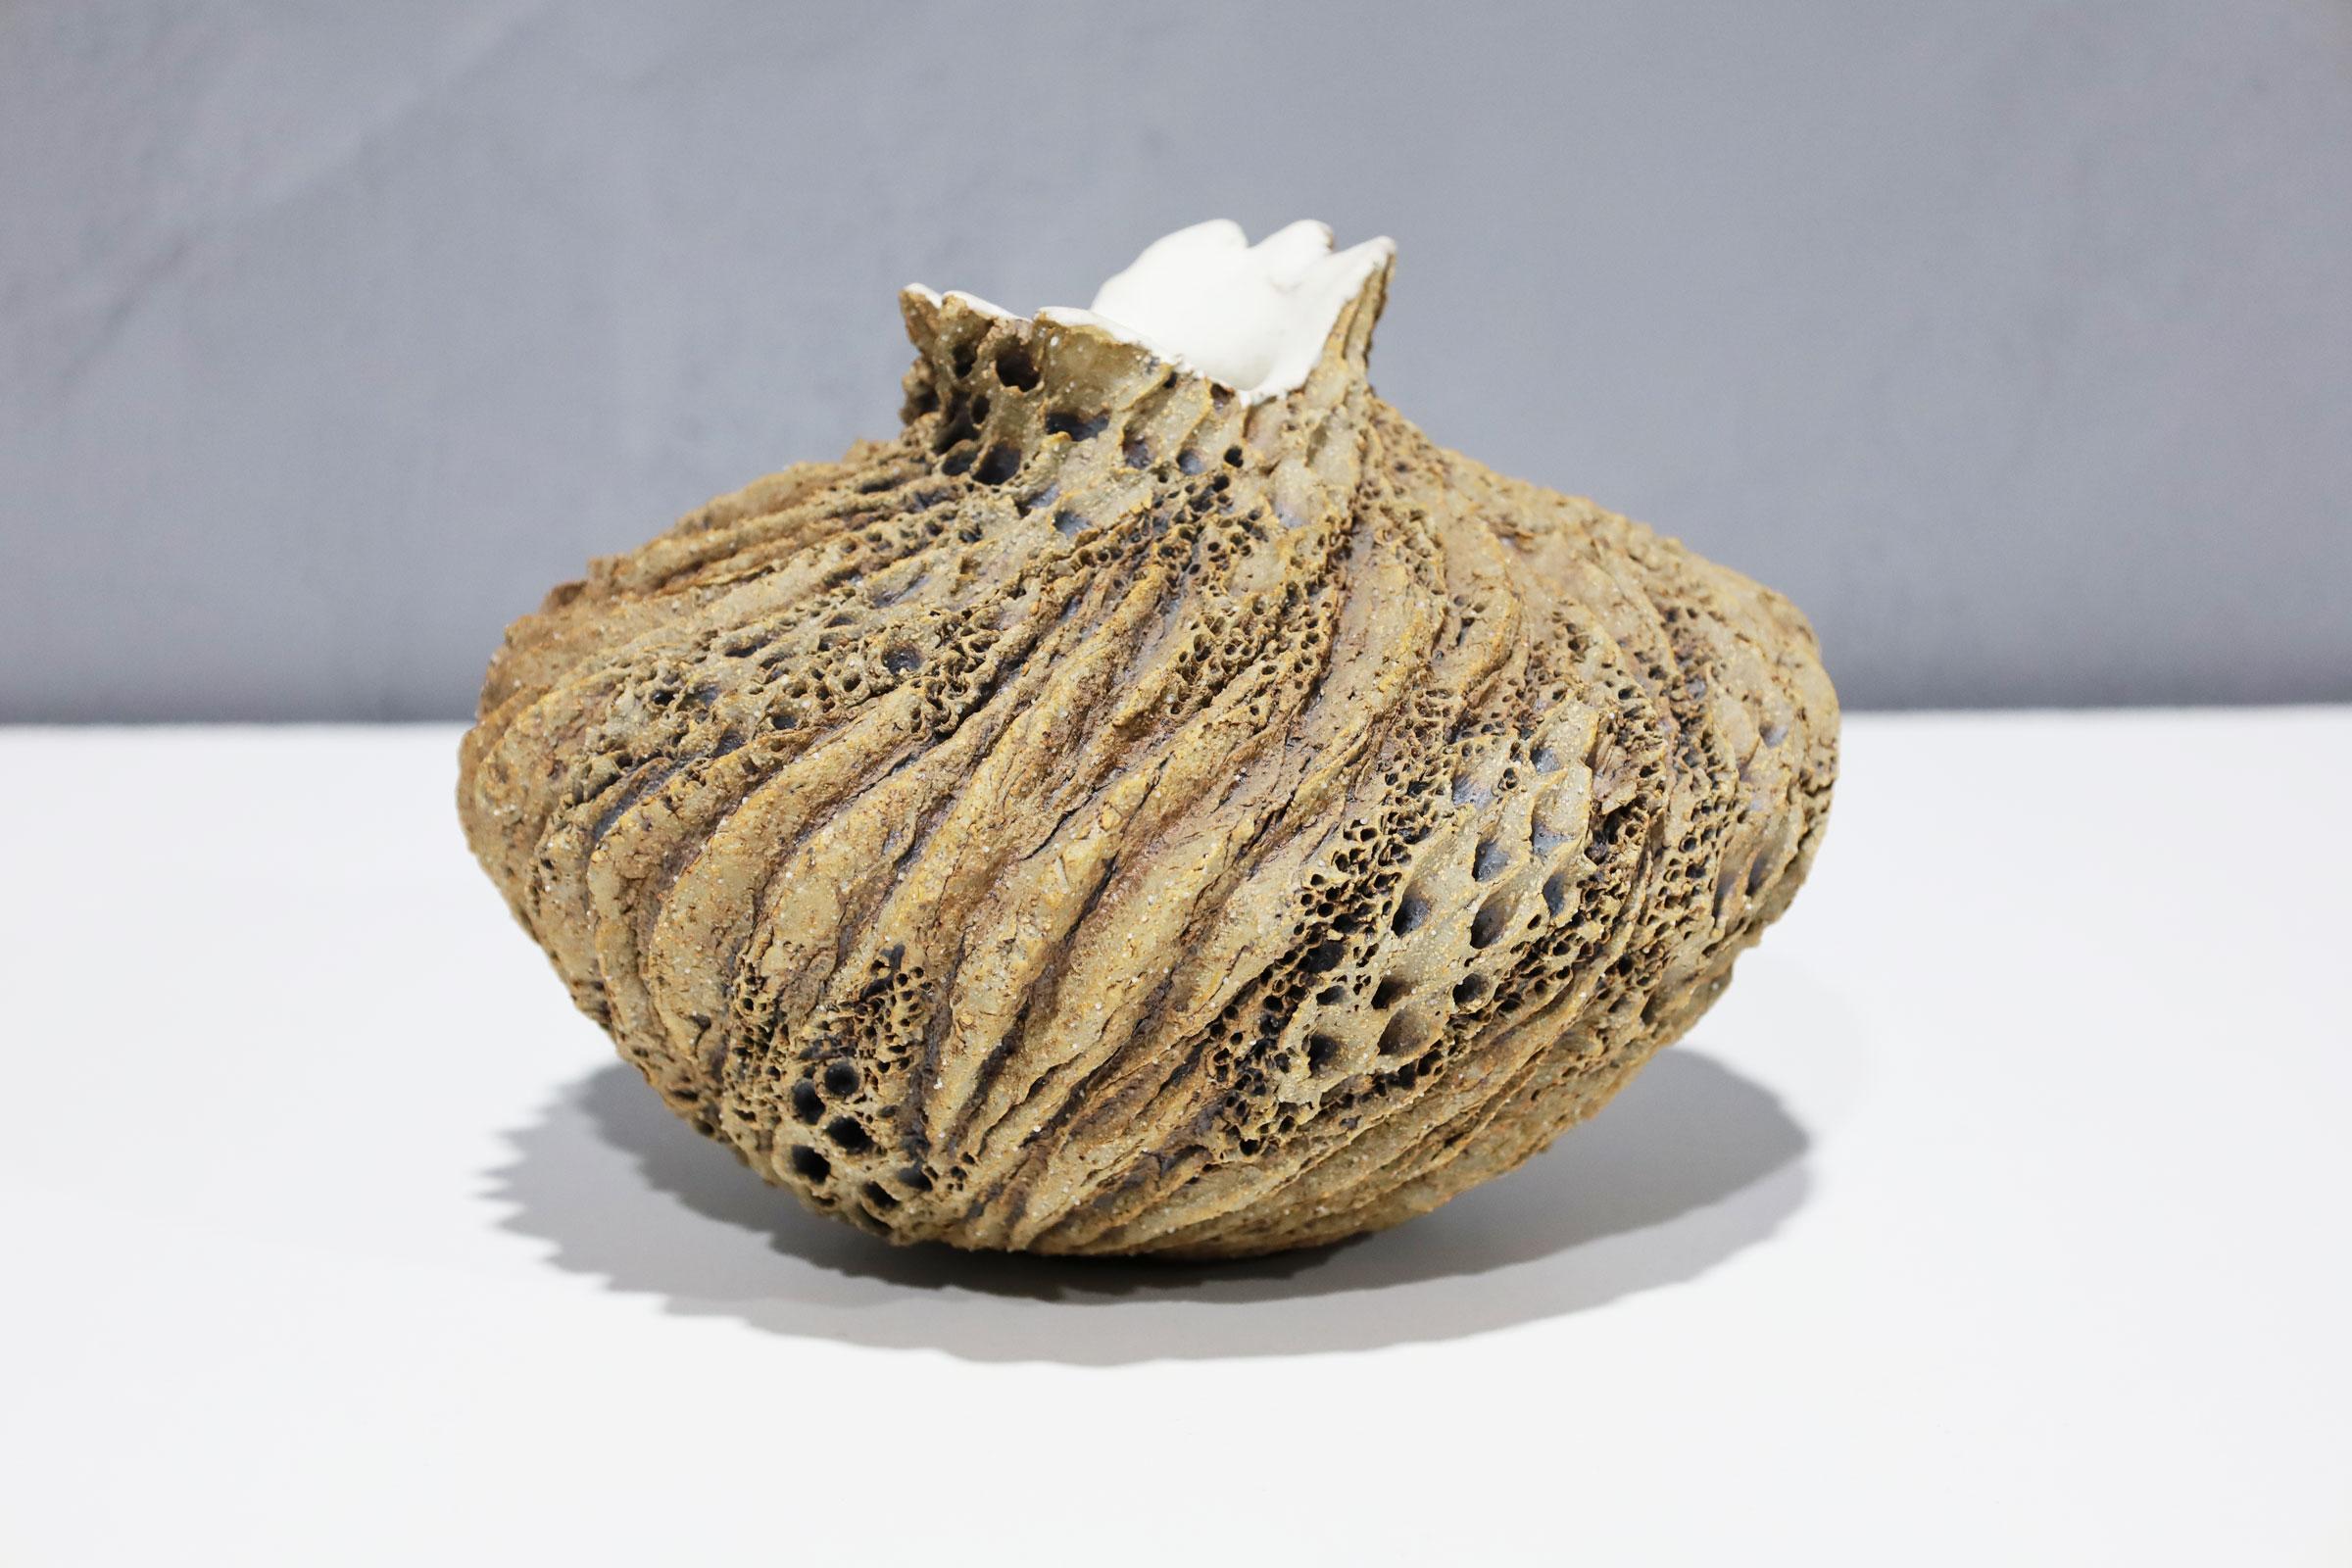 Anne Goldman has been involved in ceramics for over twenty years. Her work is represented extensively in galleries, museums and private collections throughout the U.S., Europe, and Asia, and has been featured in numerous one-woman shows. Her many